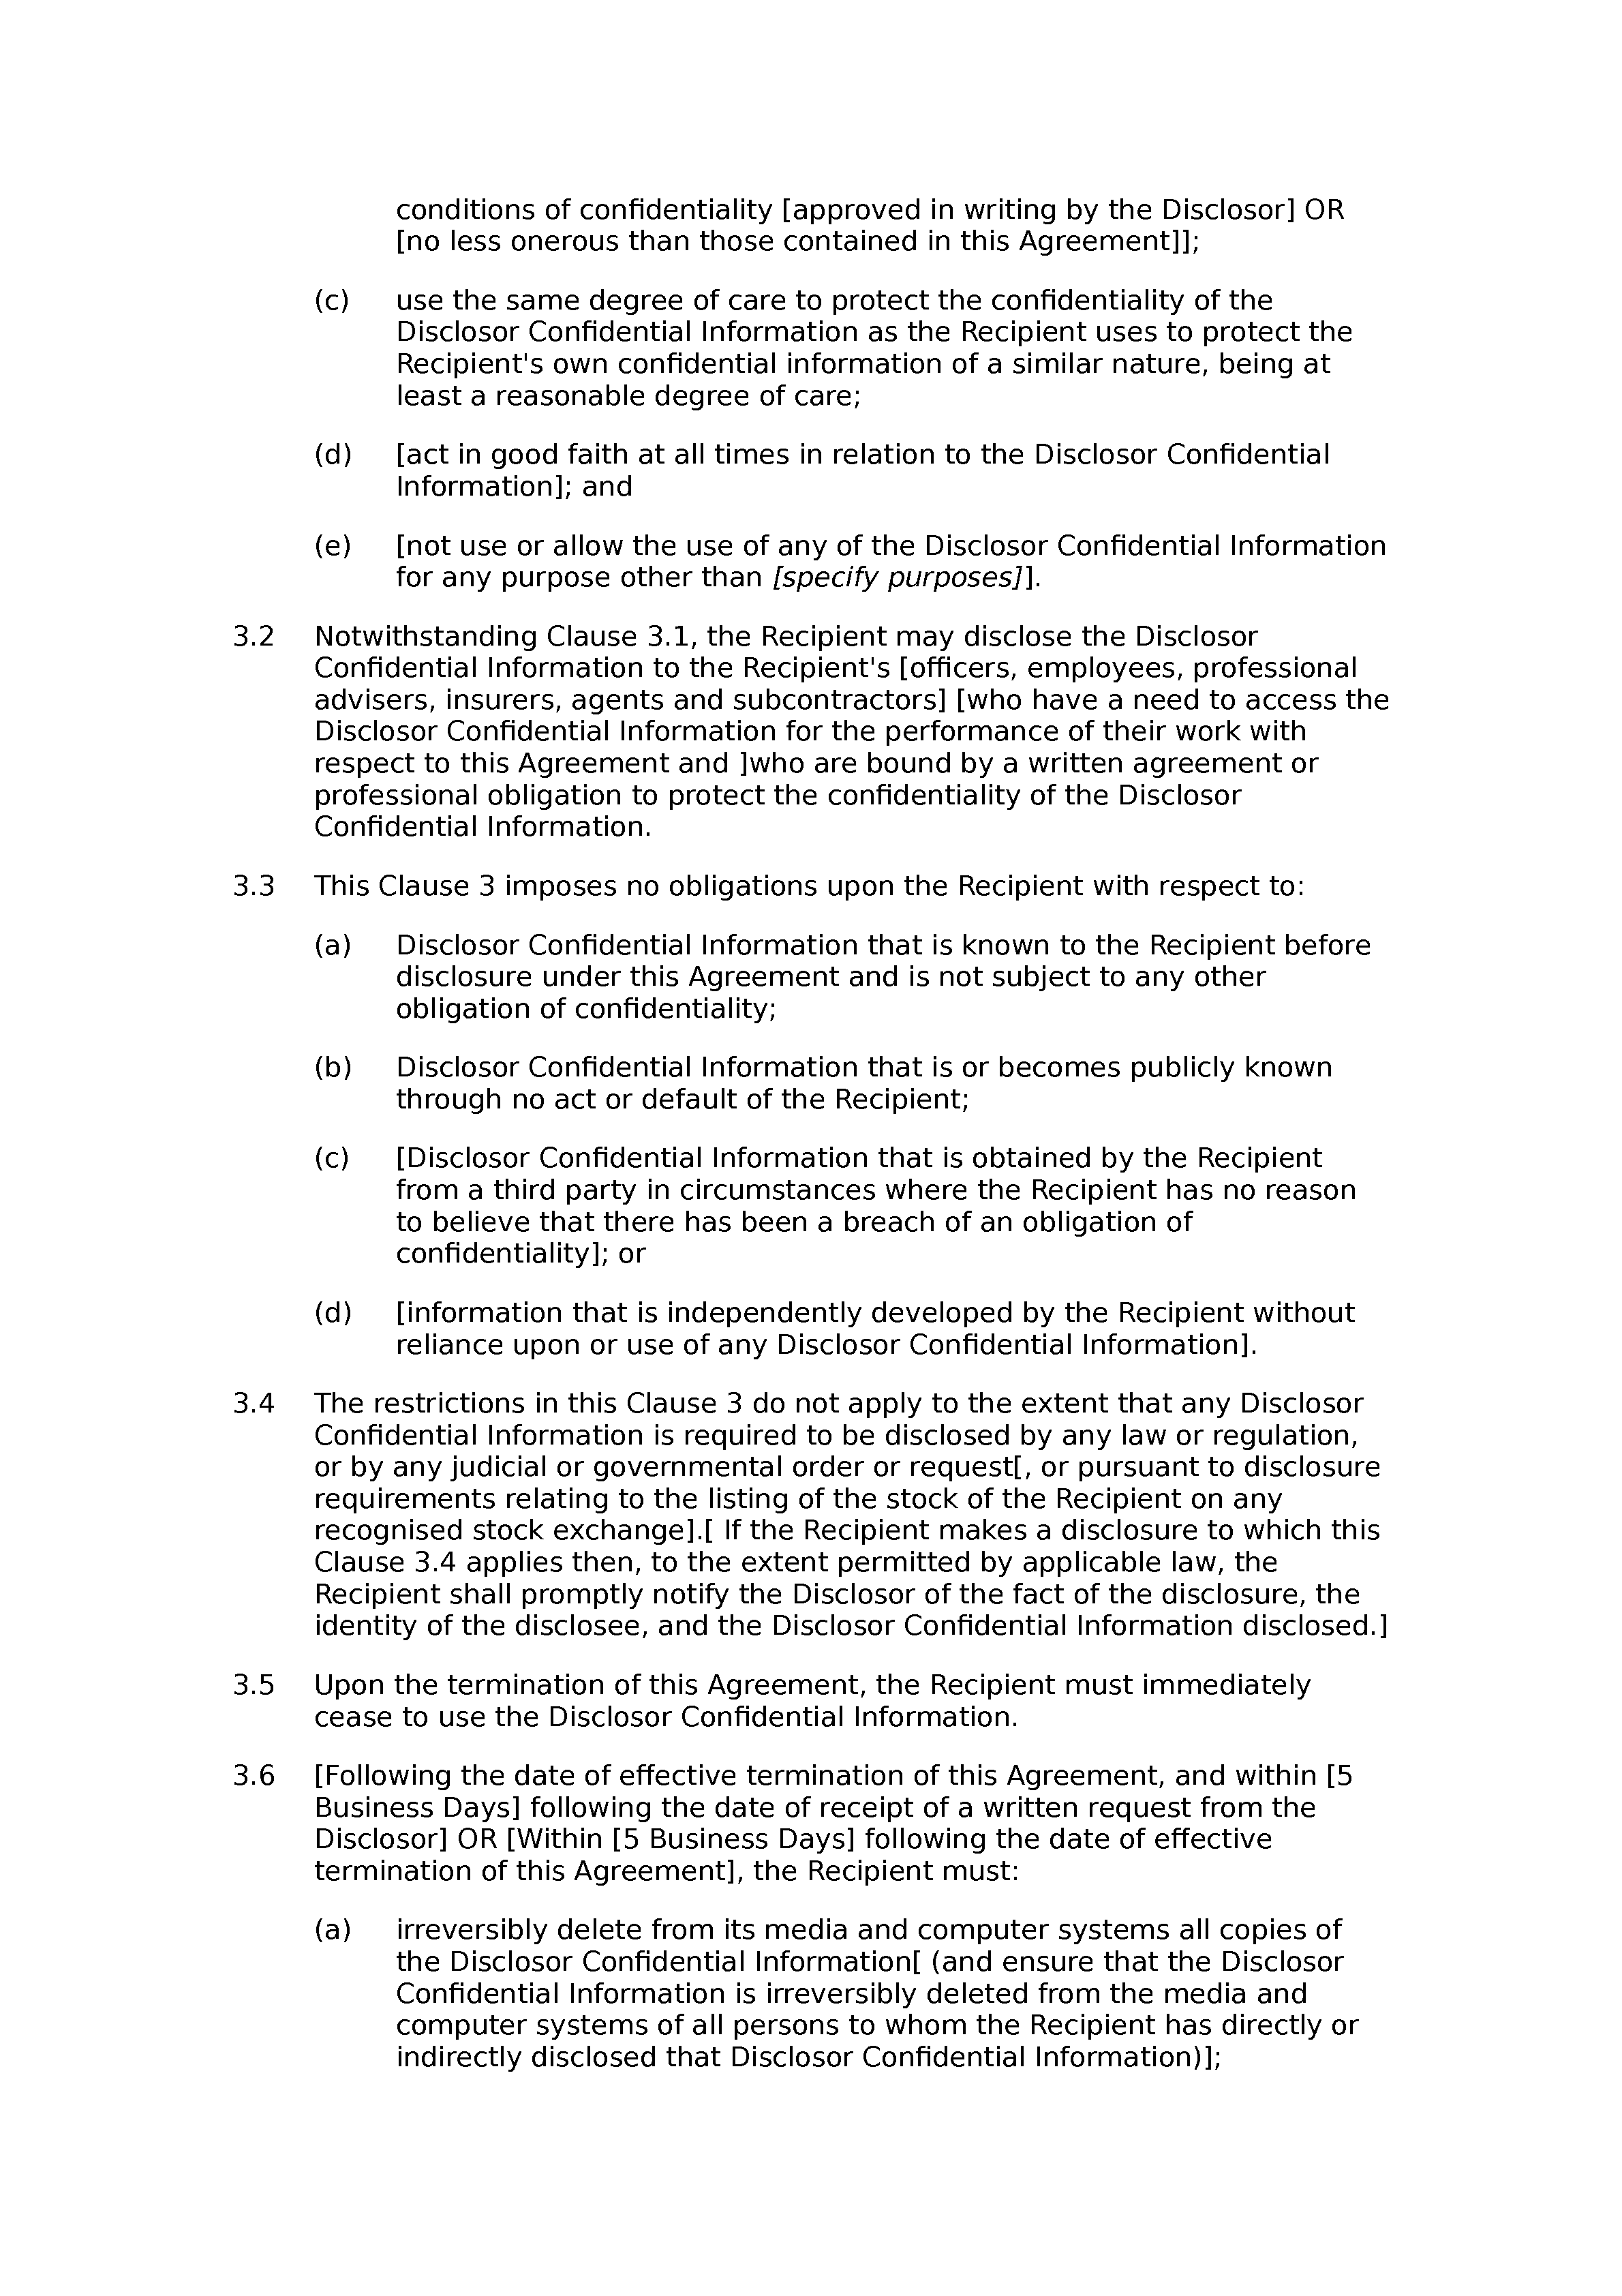 Online non-disclosure agreement (unilateral) document preview